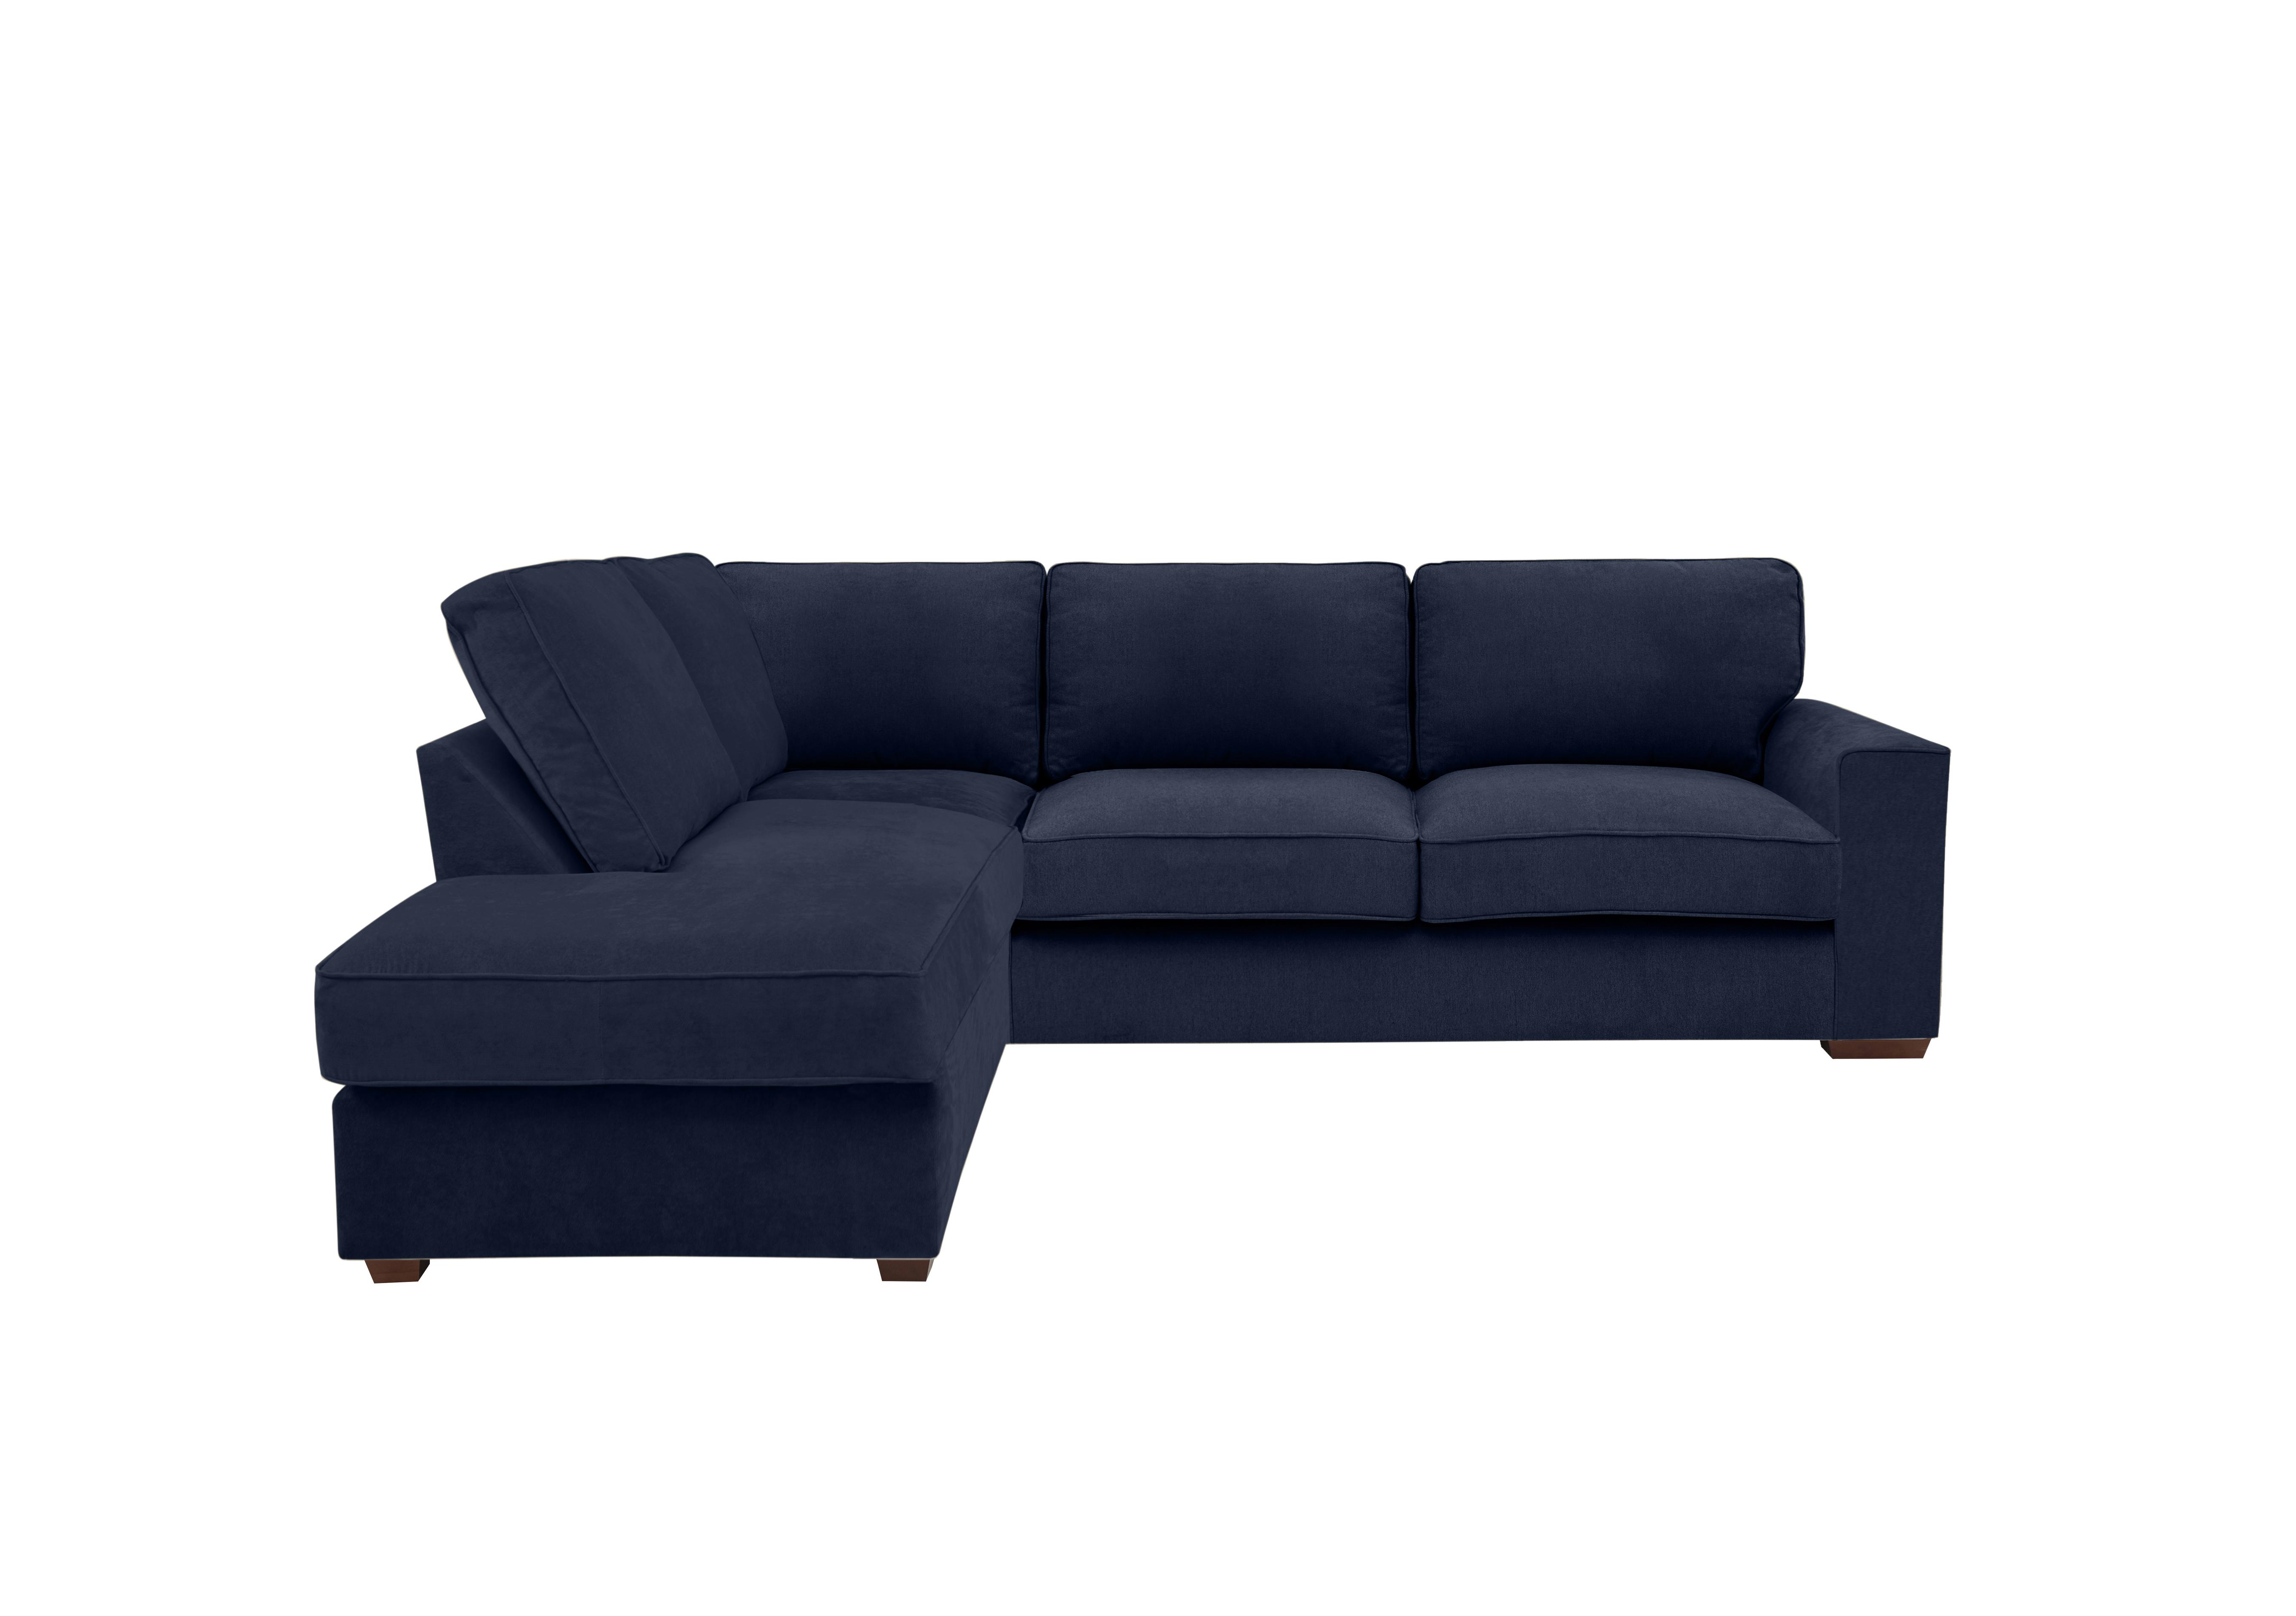 Cory Fabric Corner Chaise Classic Back Sofa in Cosmo Navy on Furniture Village